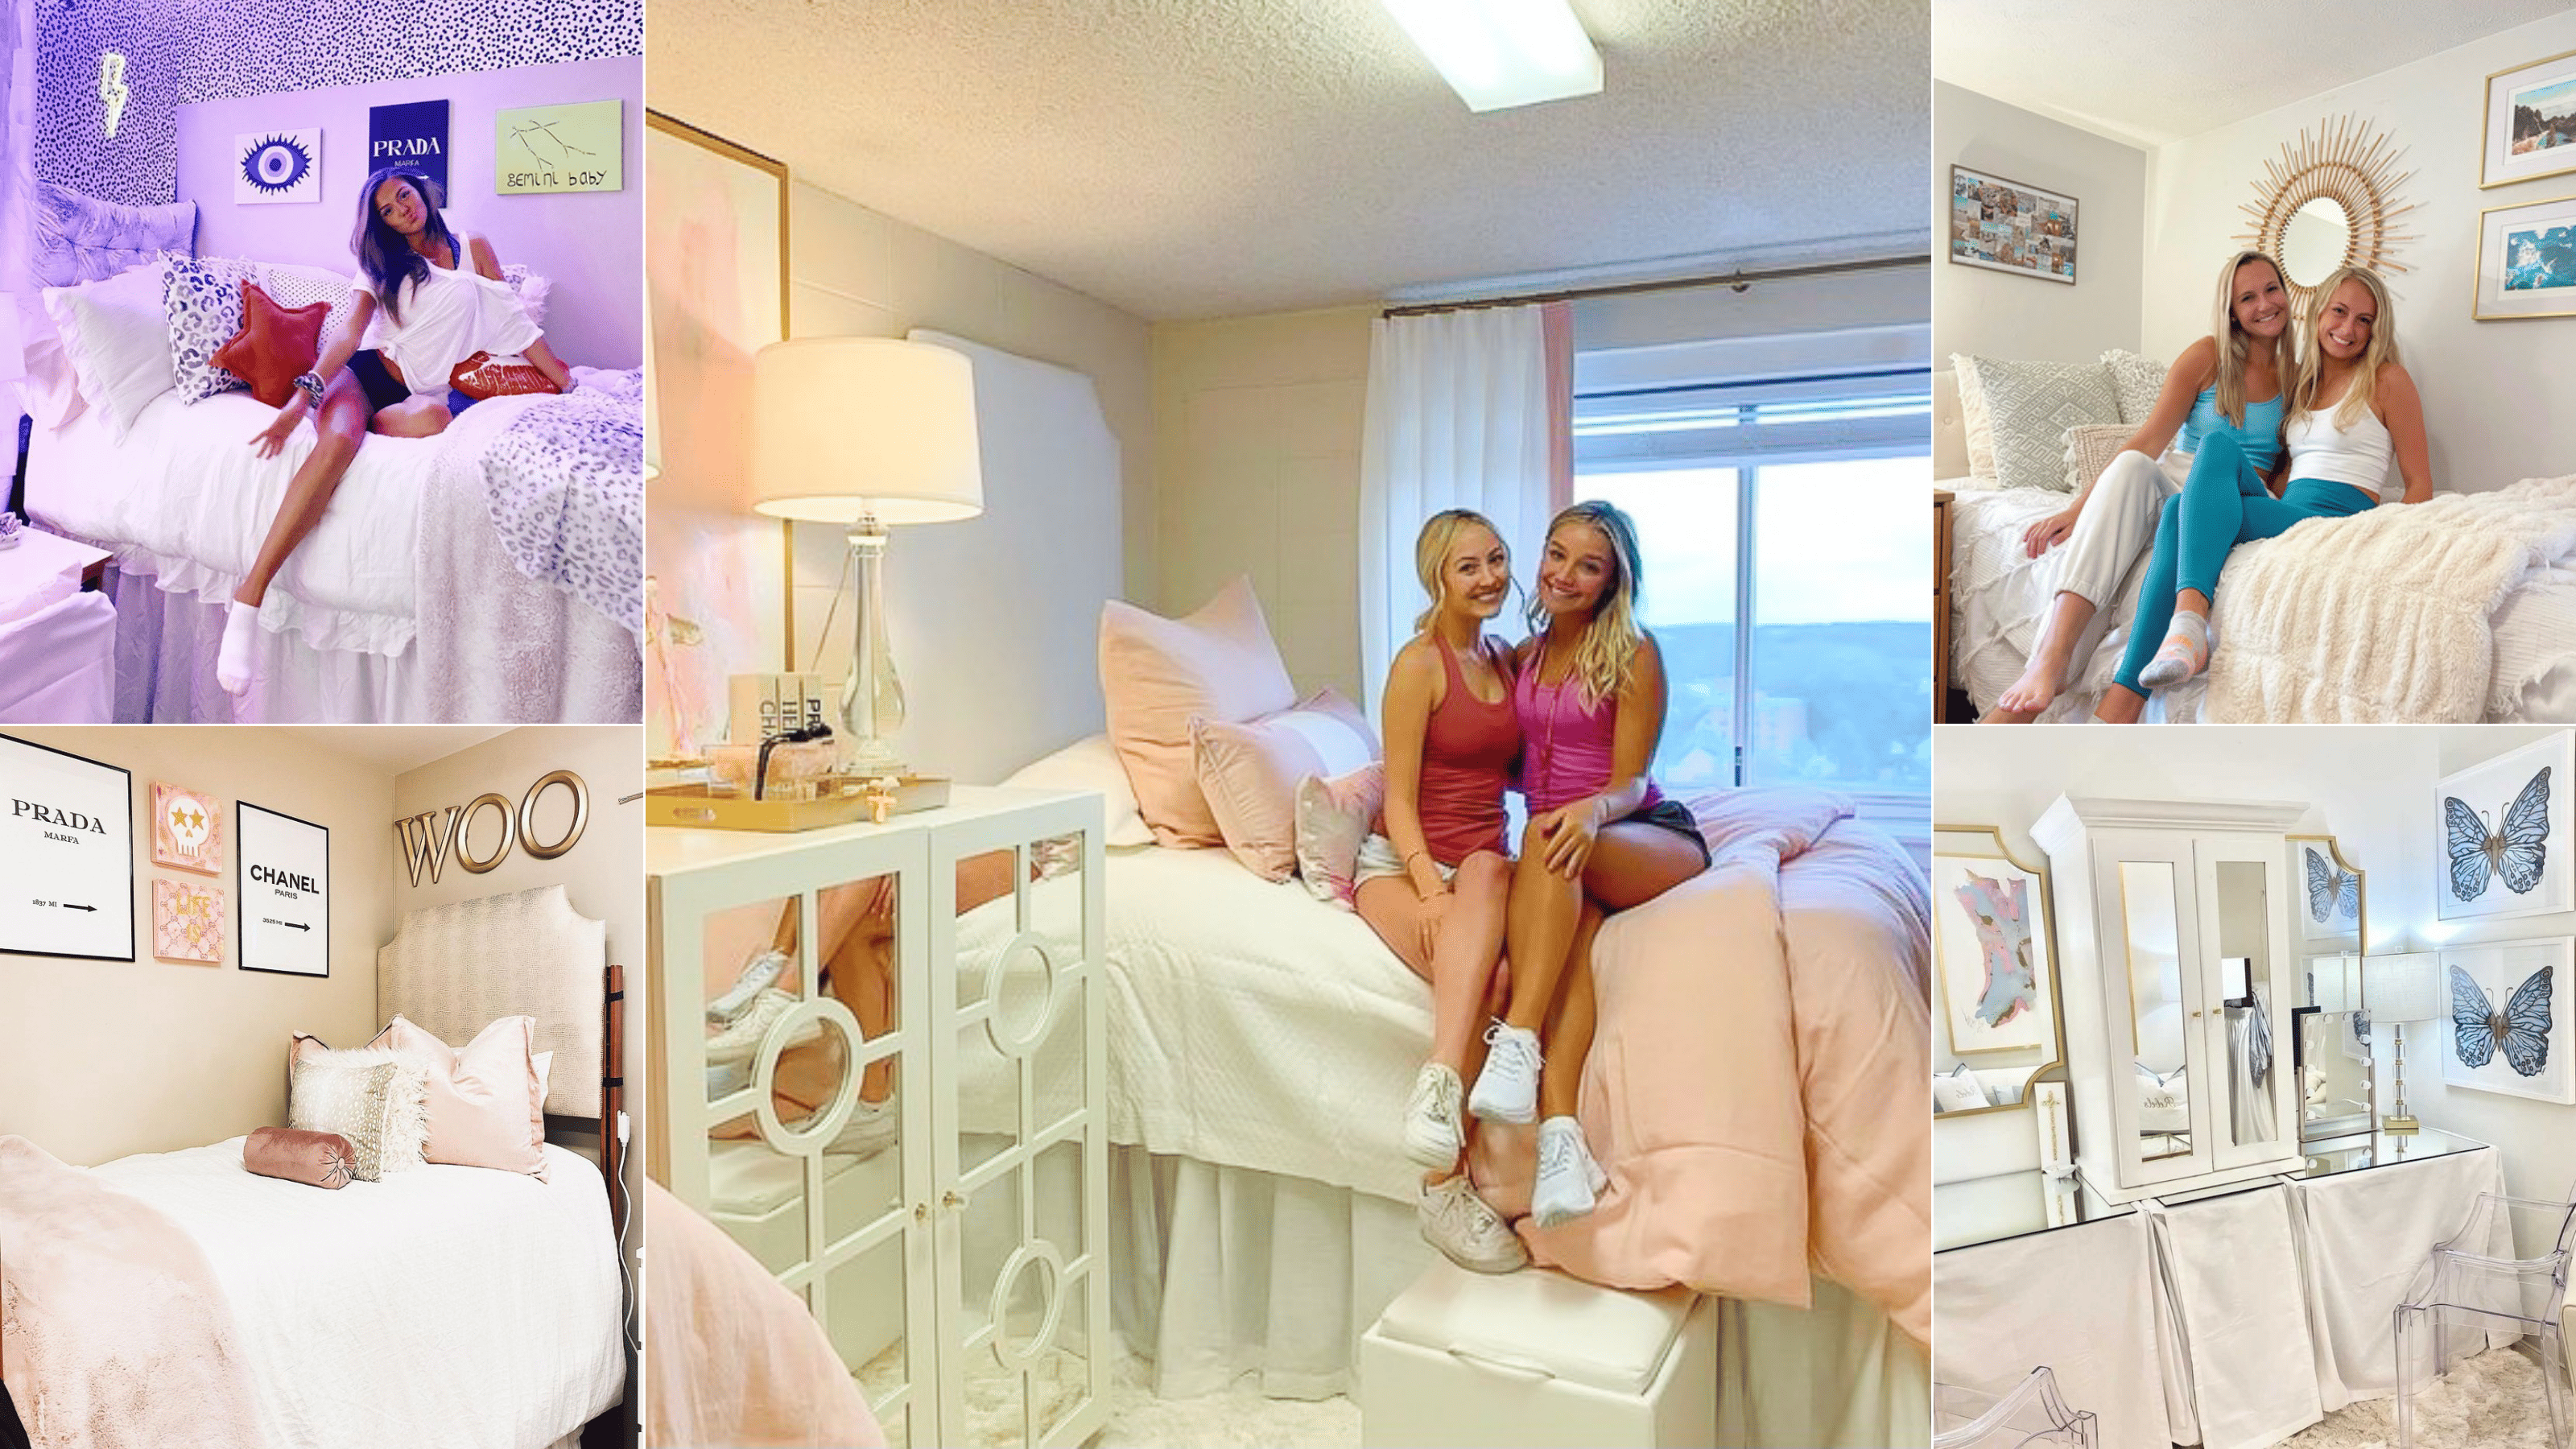 The Best College Dorm Room Ideas for Girls & Where to Buy